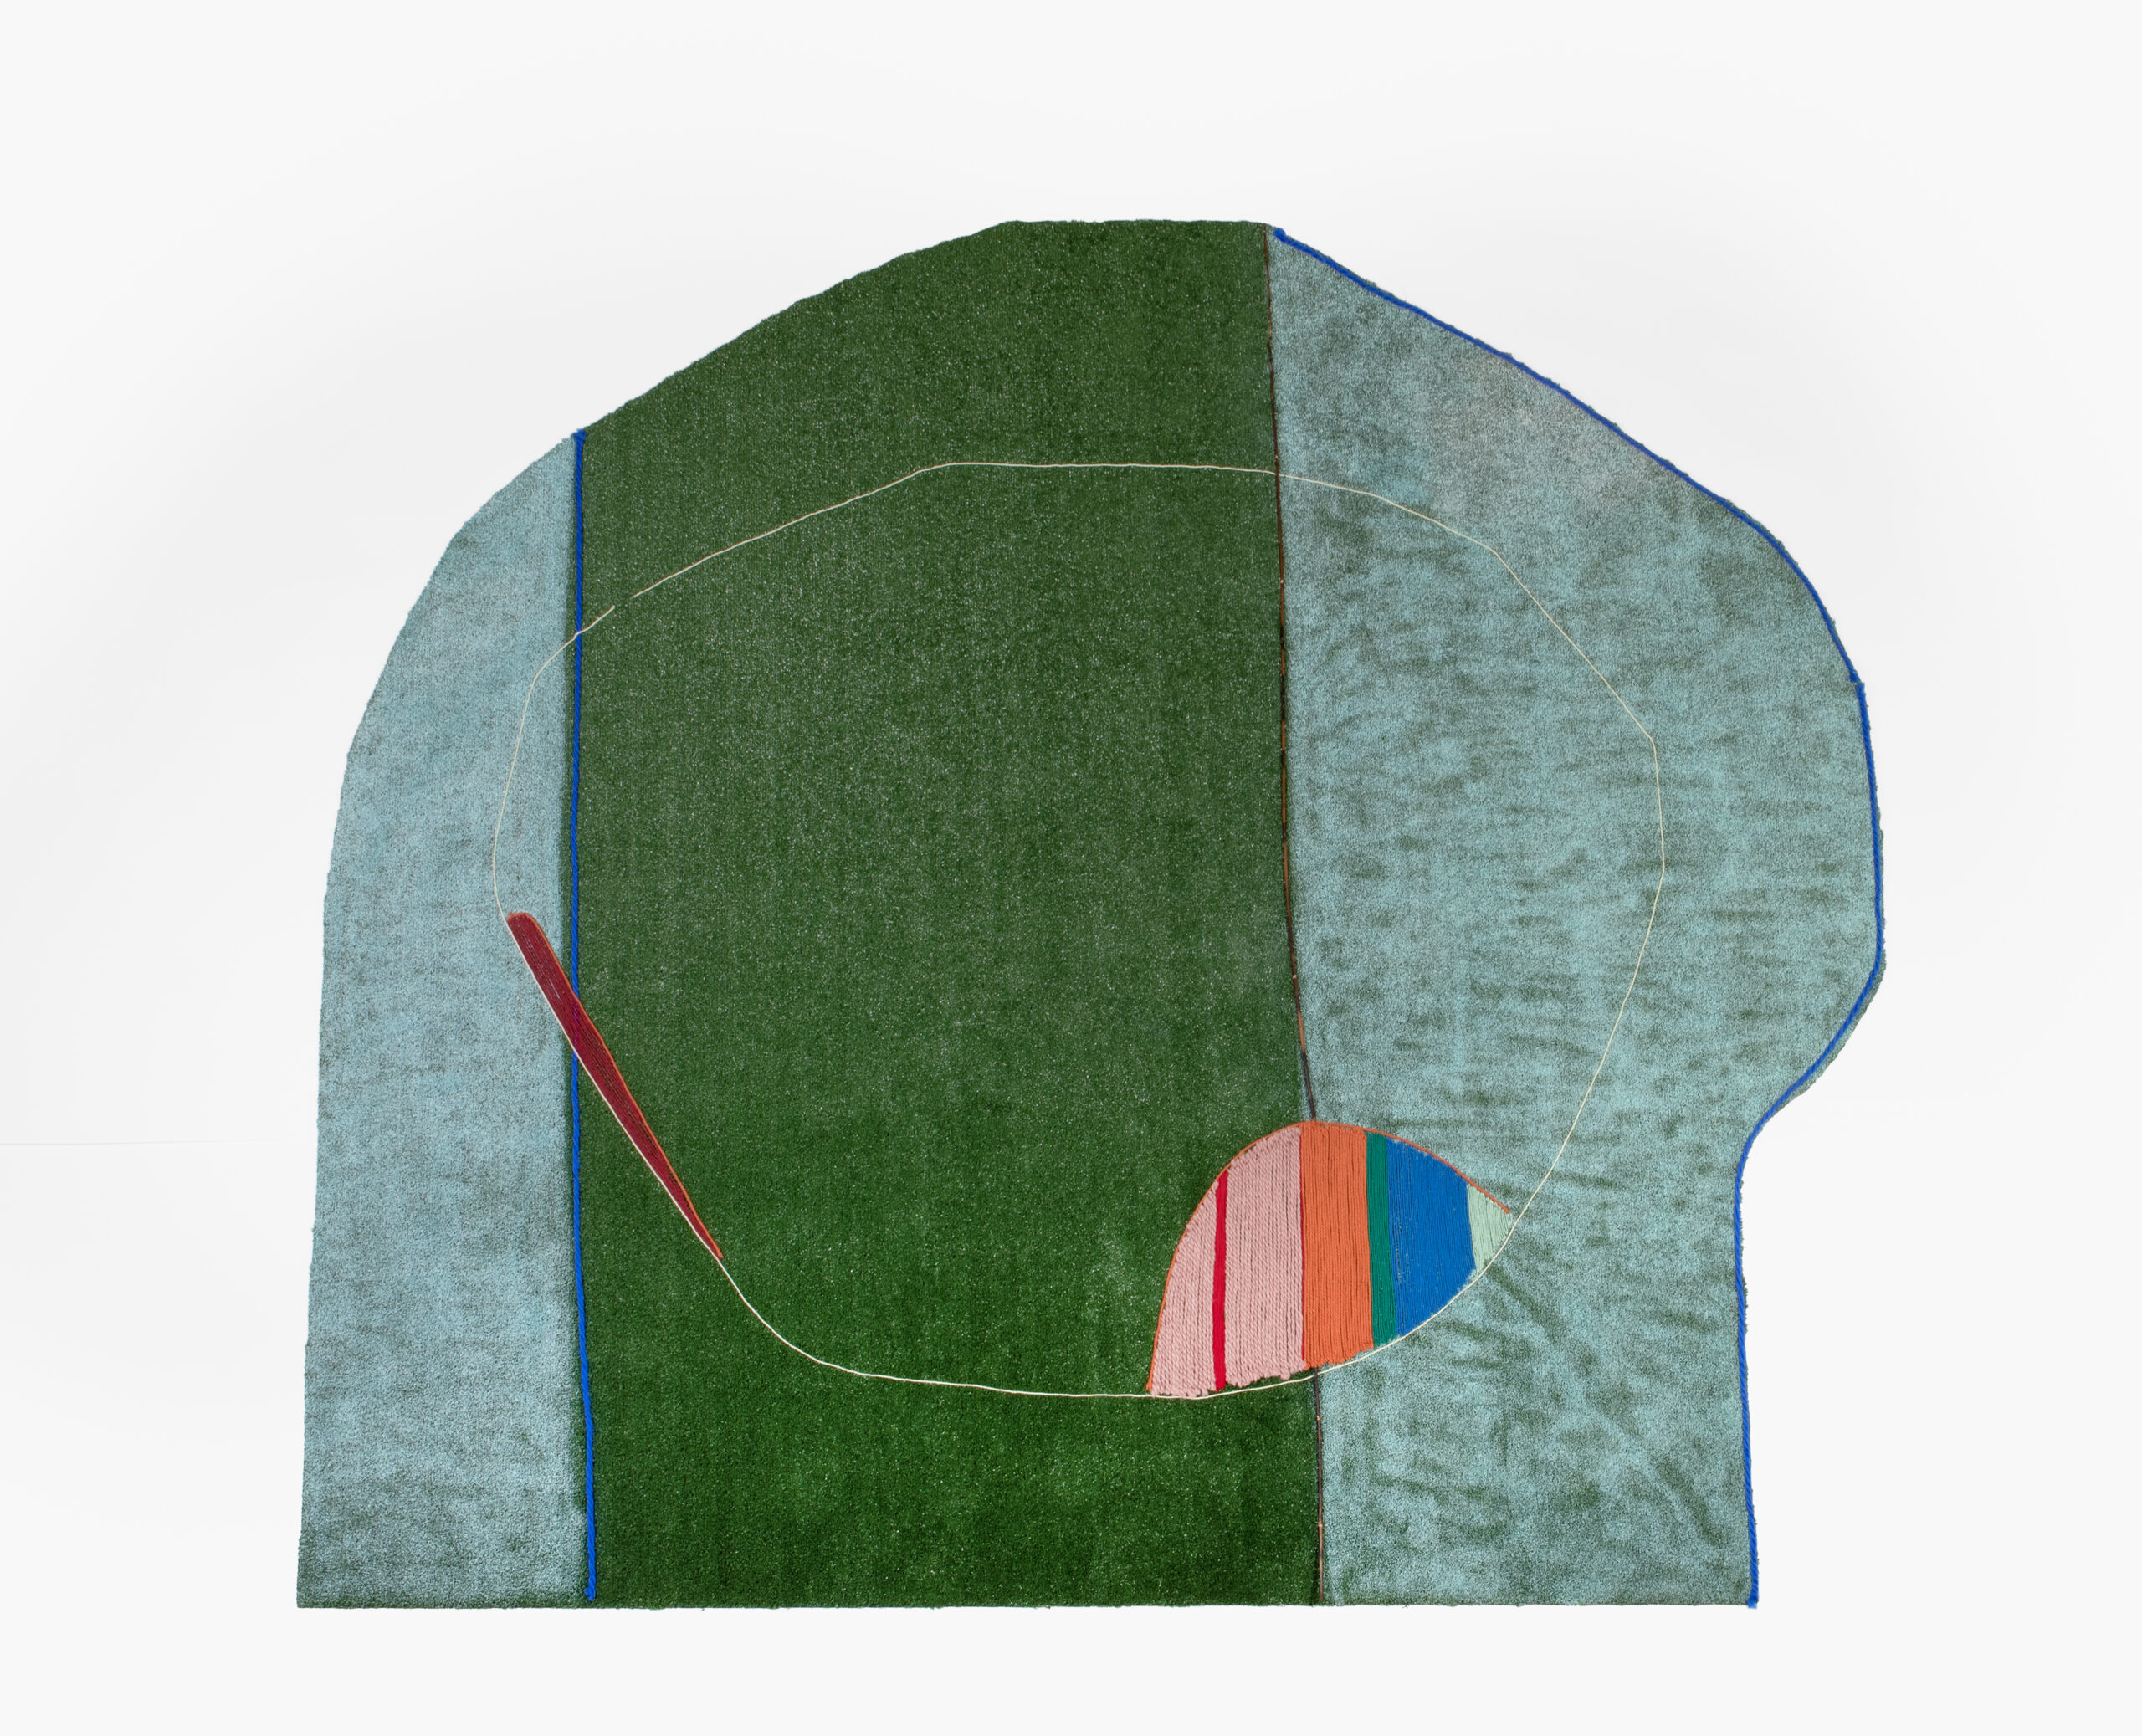 
							

									Teresa Baker									On a Slant Village 2022									spray paint, yarn, and willow on astroturf<br />
102 x 112 1/2 inches<br />
<br />
private collection									


							